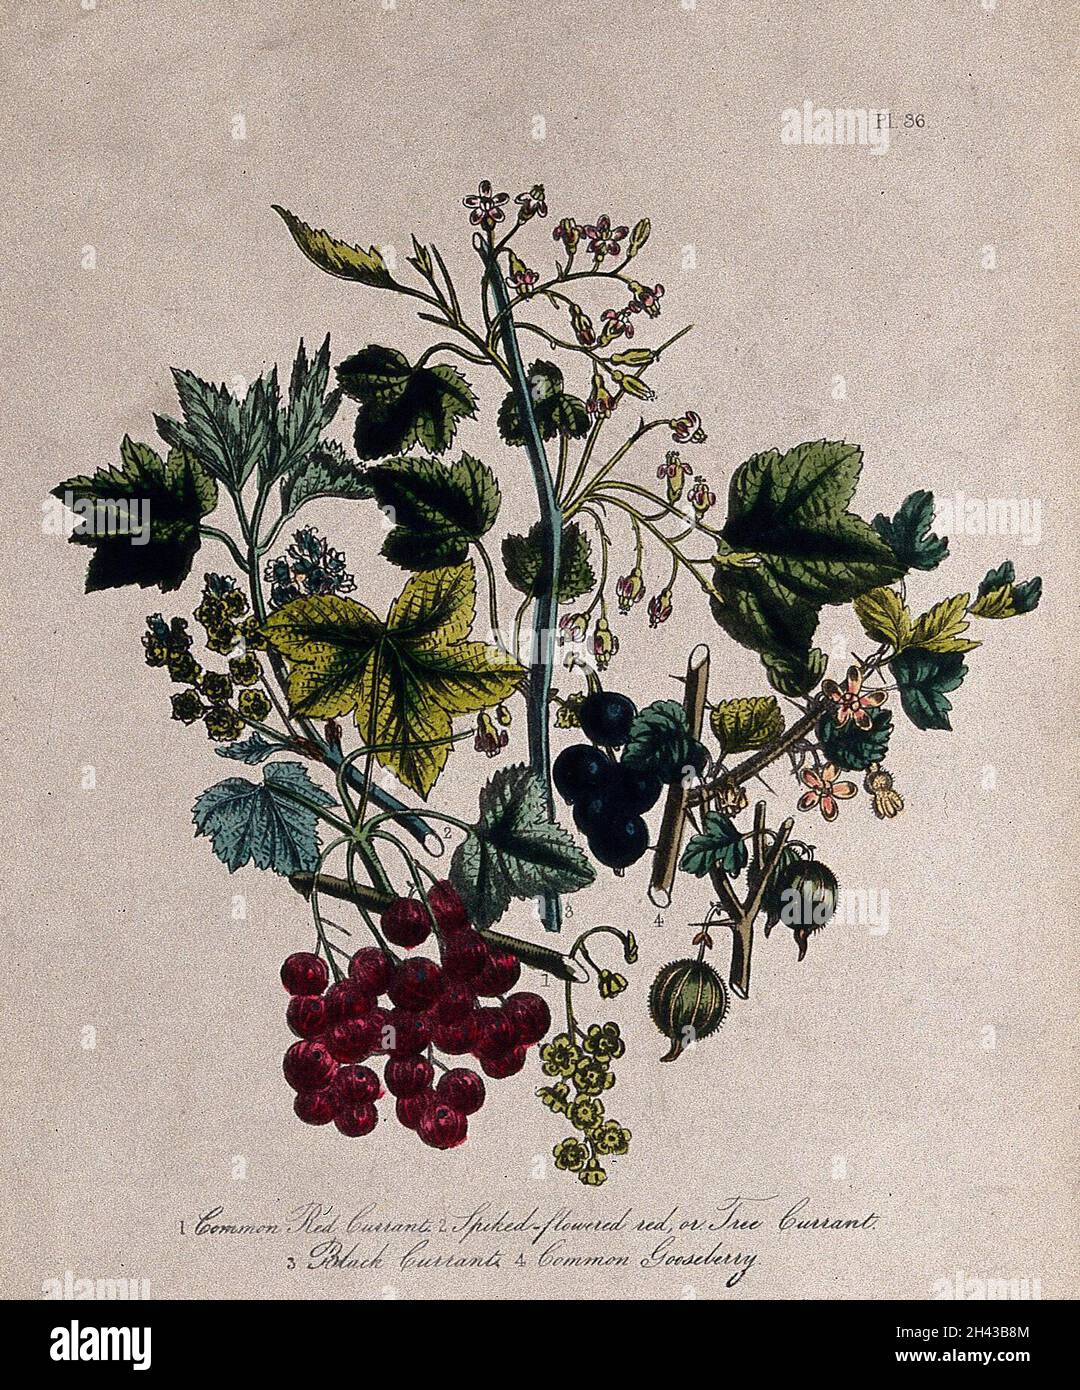 Four British wild flowers and fruit, including red currant (Ribes rubrum), black currant (Ribes nigrum) and gooseberry (Ribes uva-crispa). Coloured lithograph, c. 1856, after H. Humphreys. Stock Photo